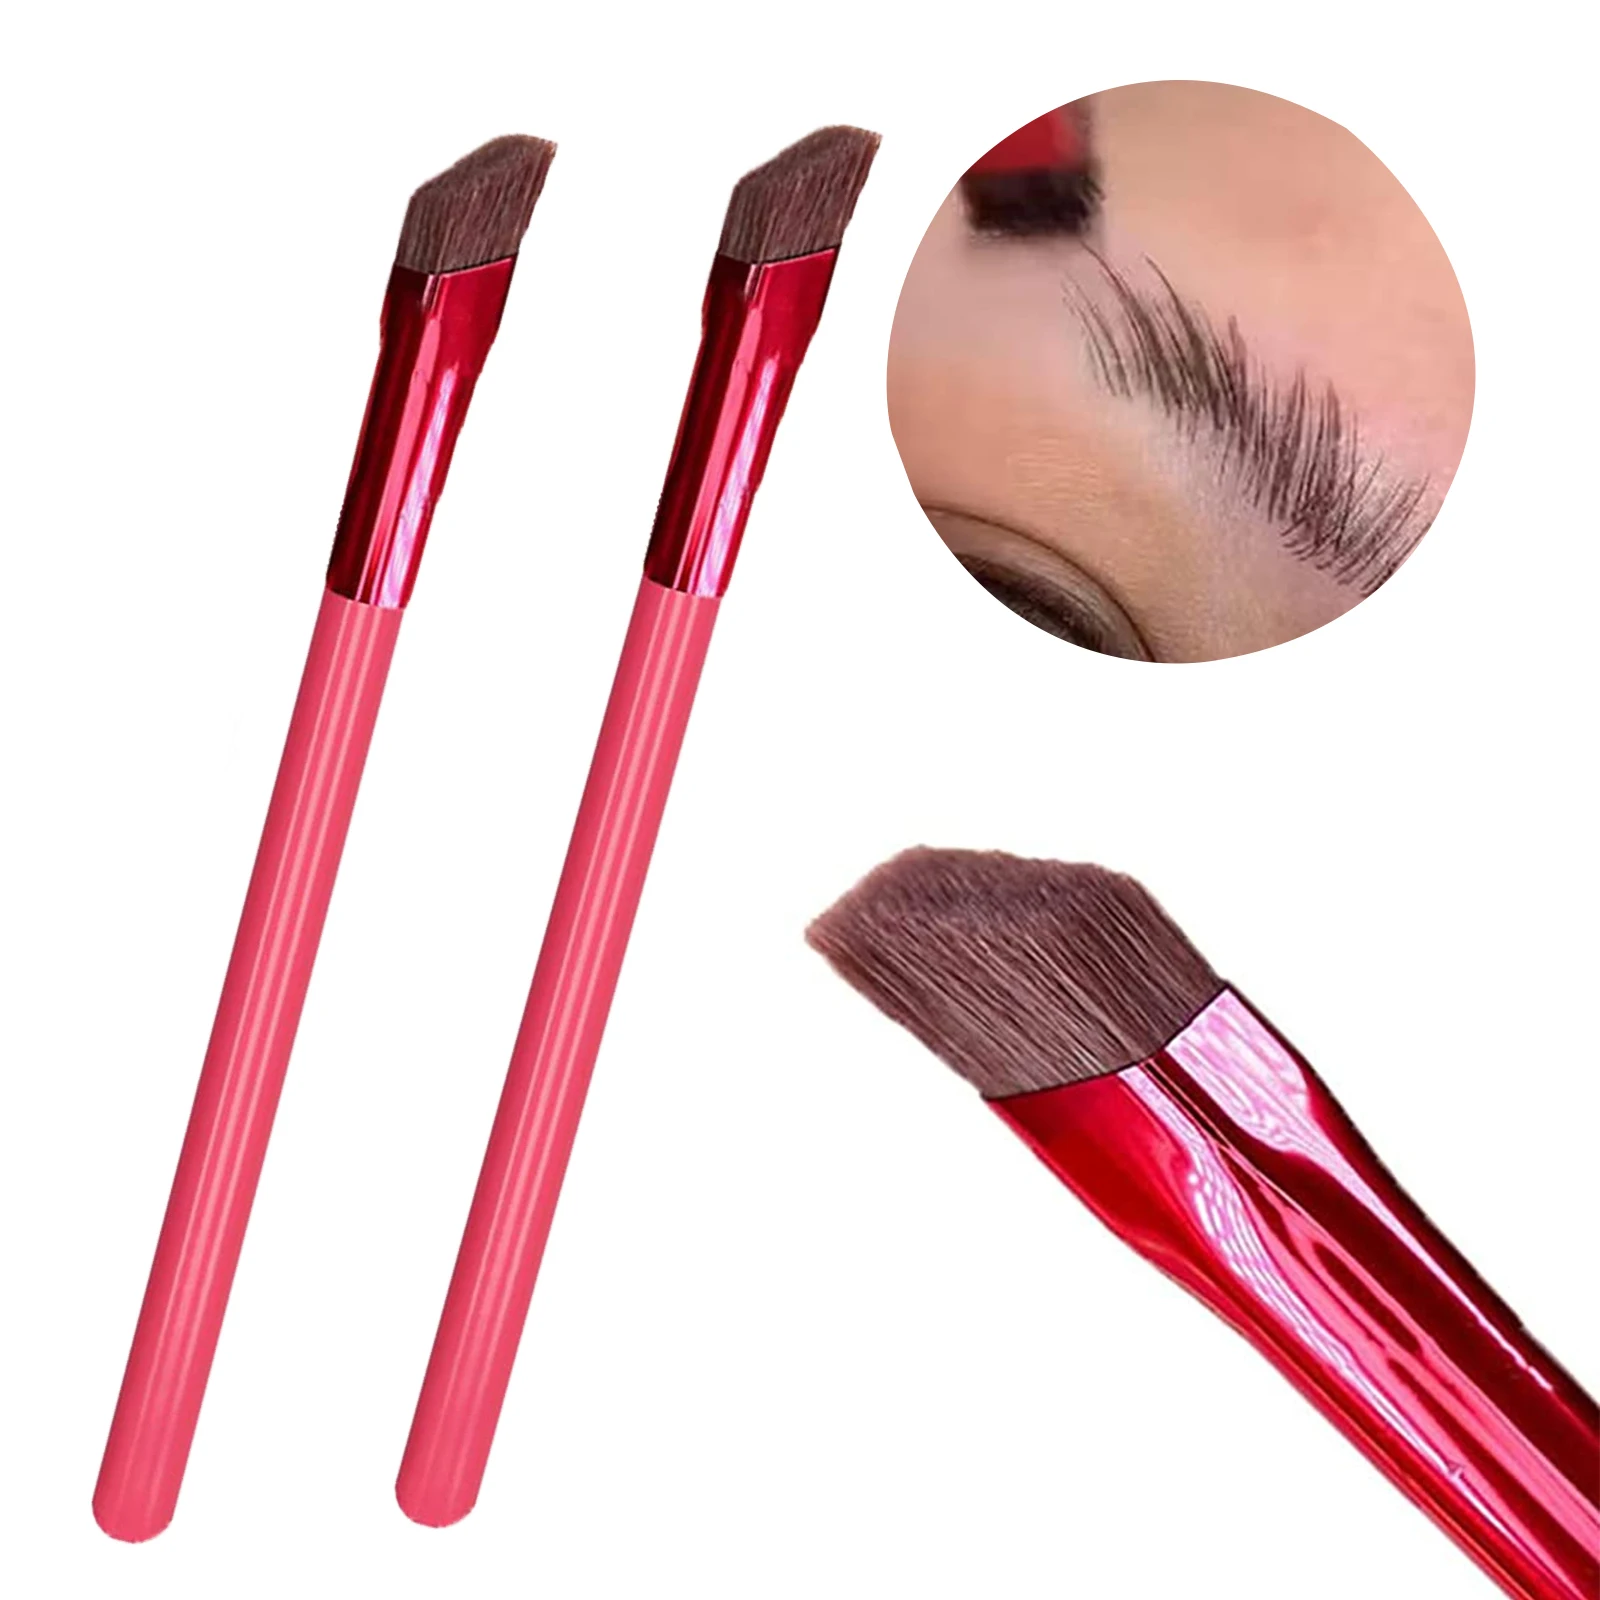 

Private Label Professional Multi-purpose Red Eyebrow Brush Angled Concealer Makeup Square Wild Eyebrow Brush